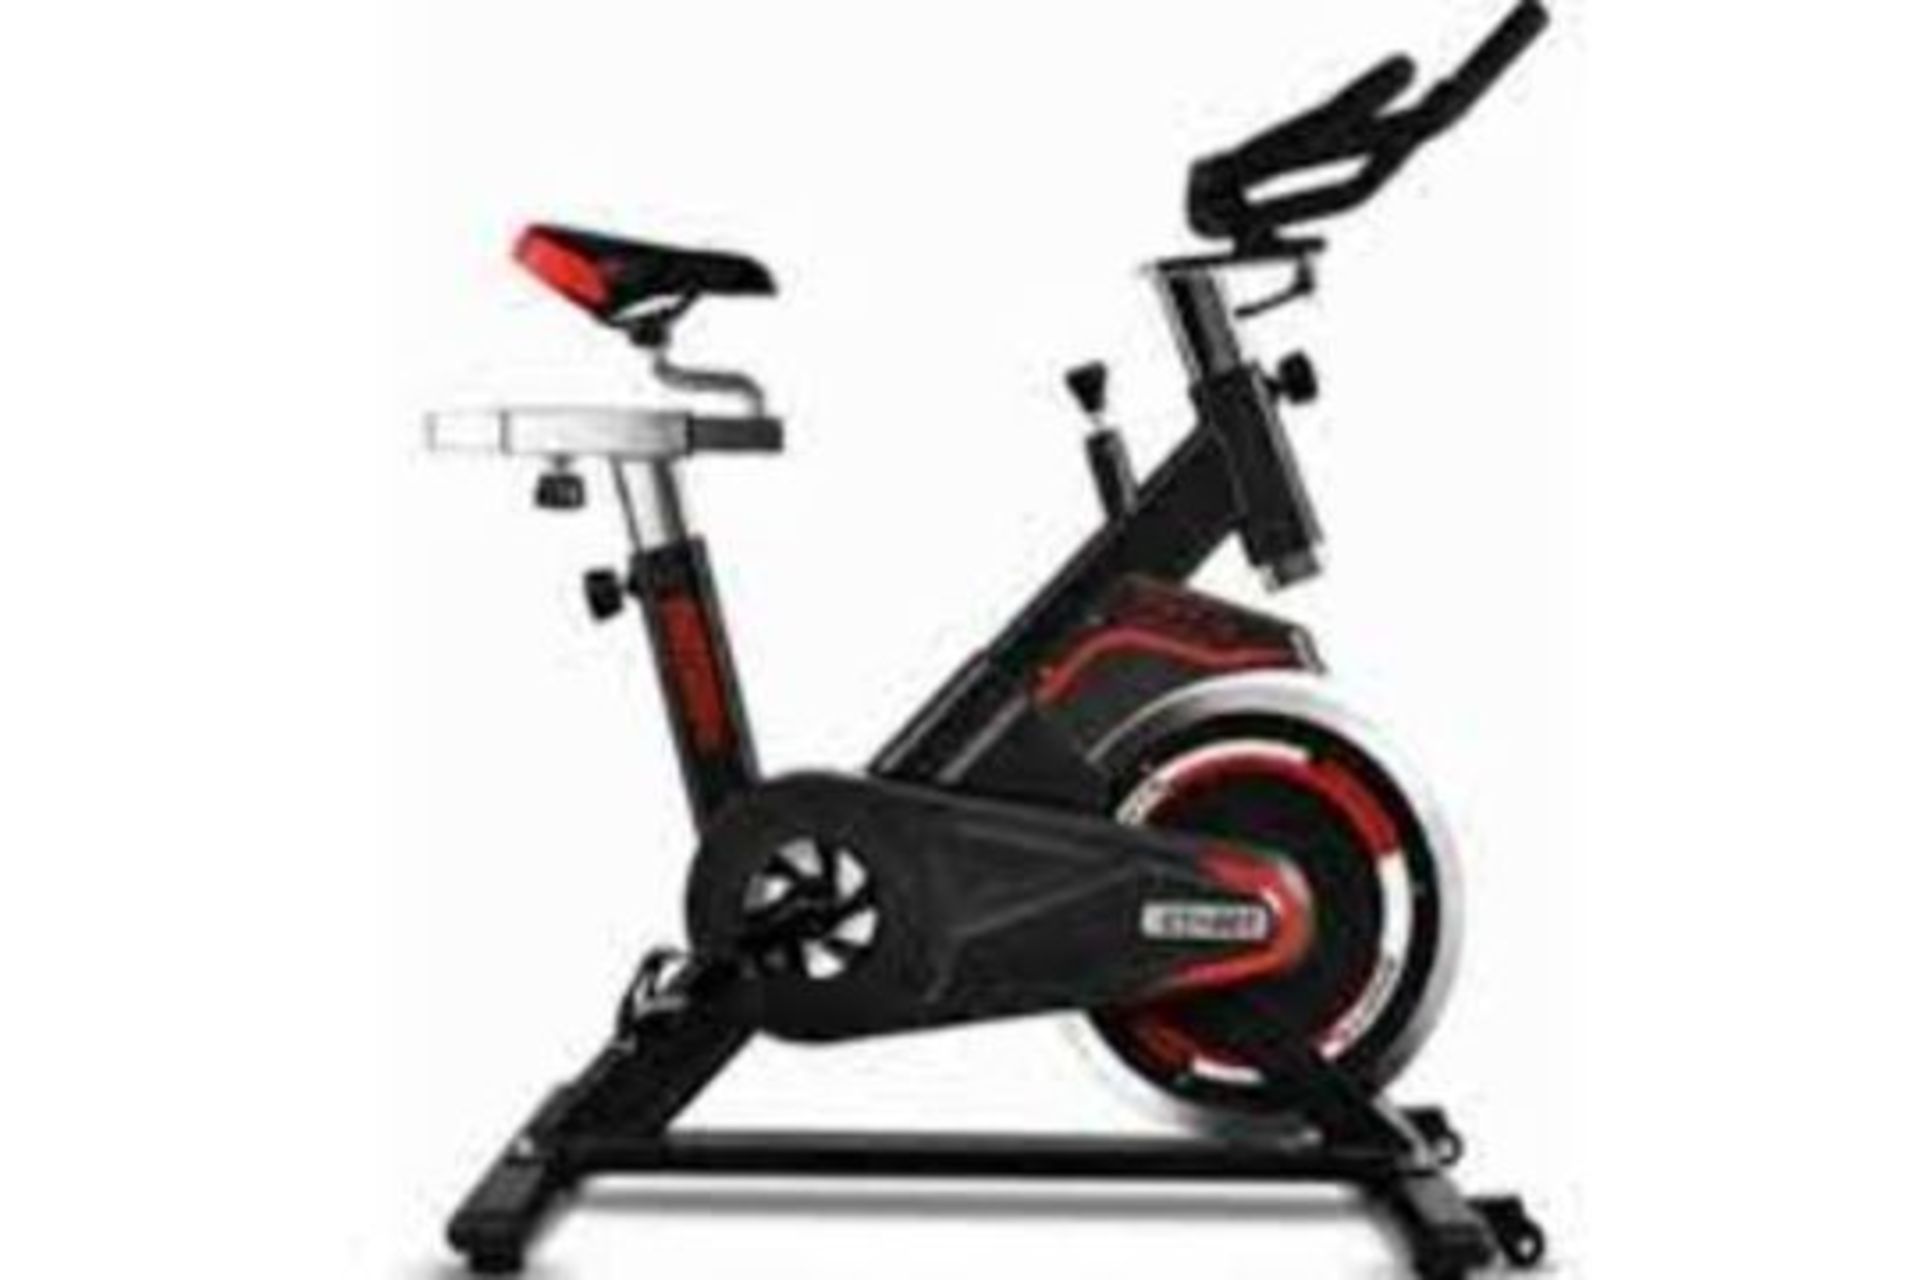 PALLET TO INCLUDE 5 X BRAND NEW ONETWOFIT EXERCISE BIKE, INDOOR CYCLING BIKE WITH 44LBS FLYWHEEL,